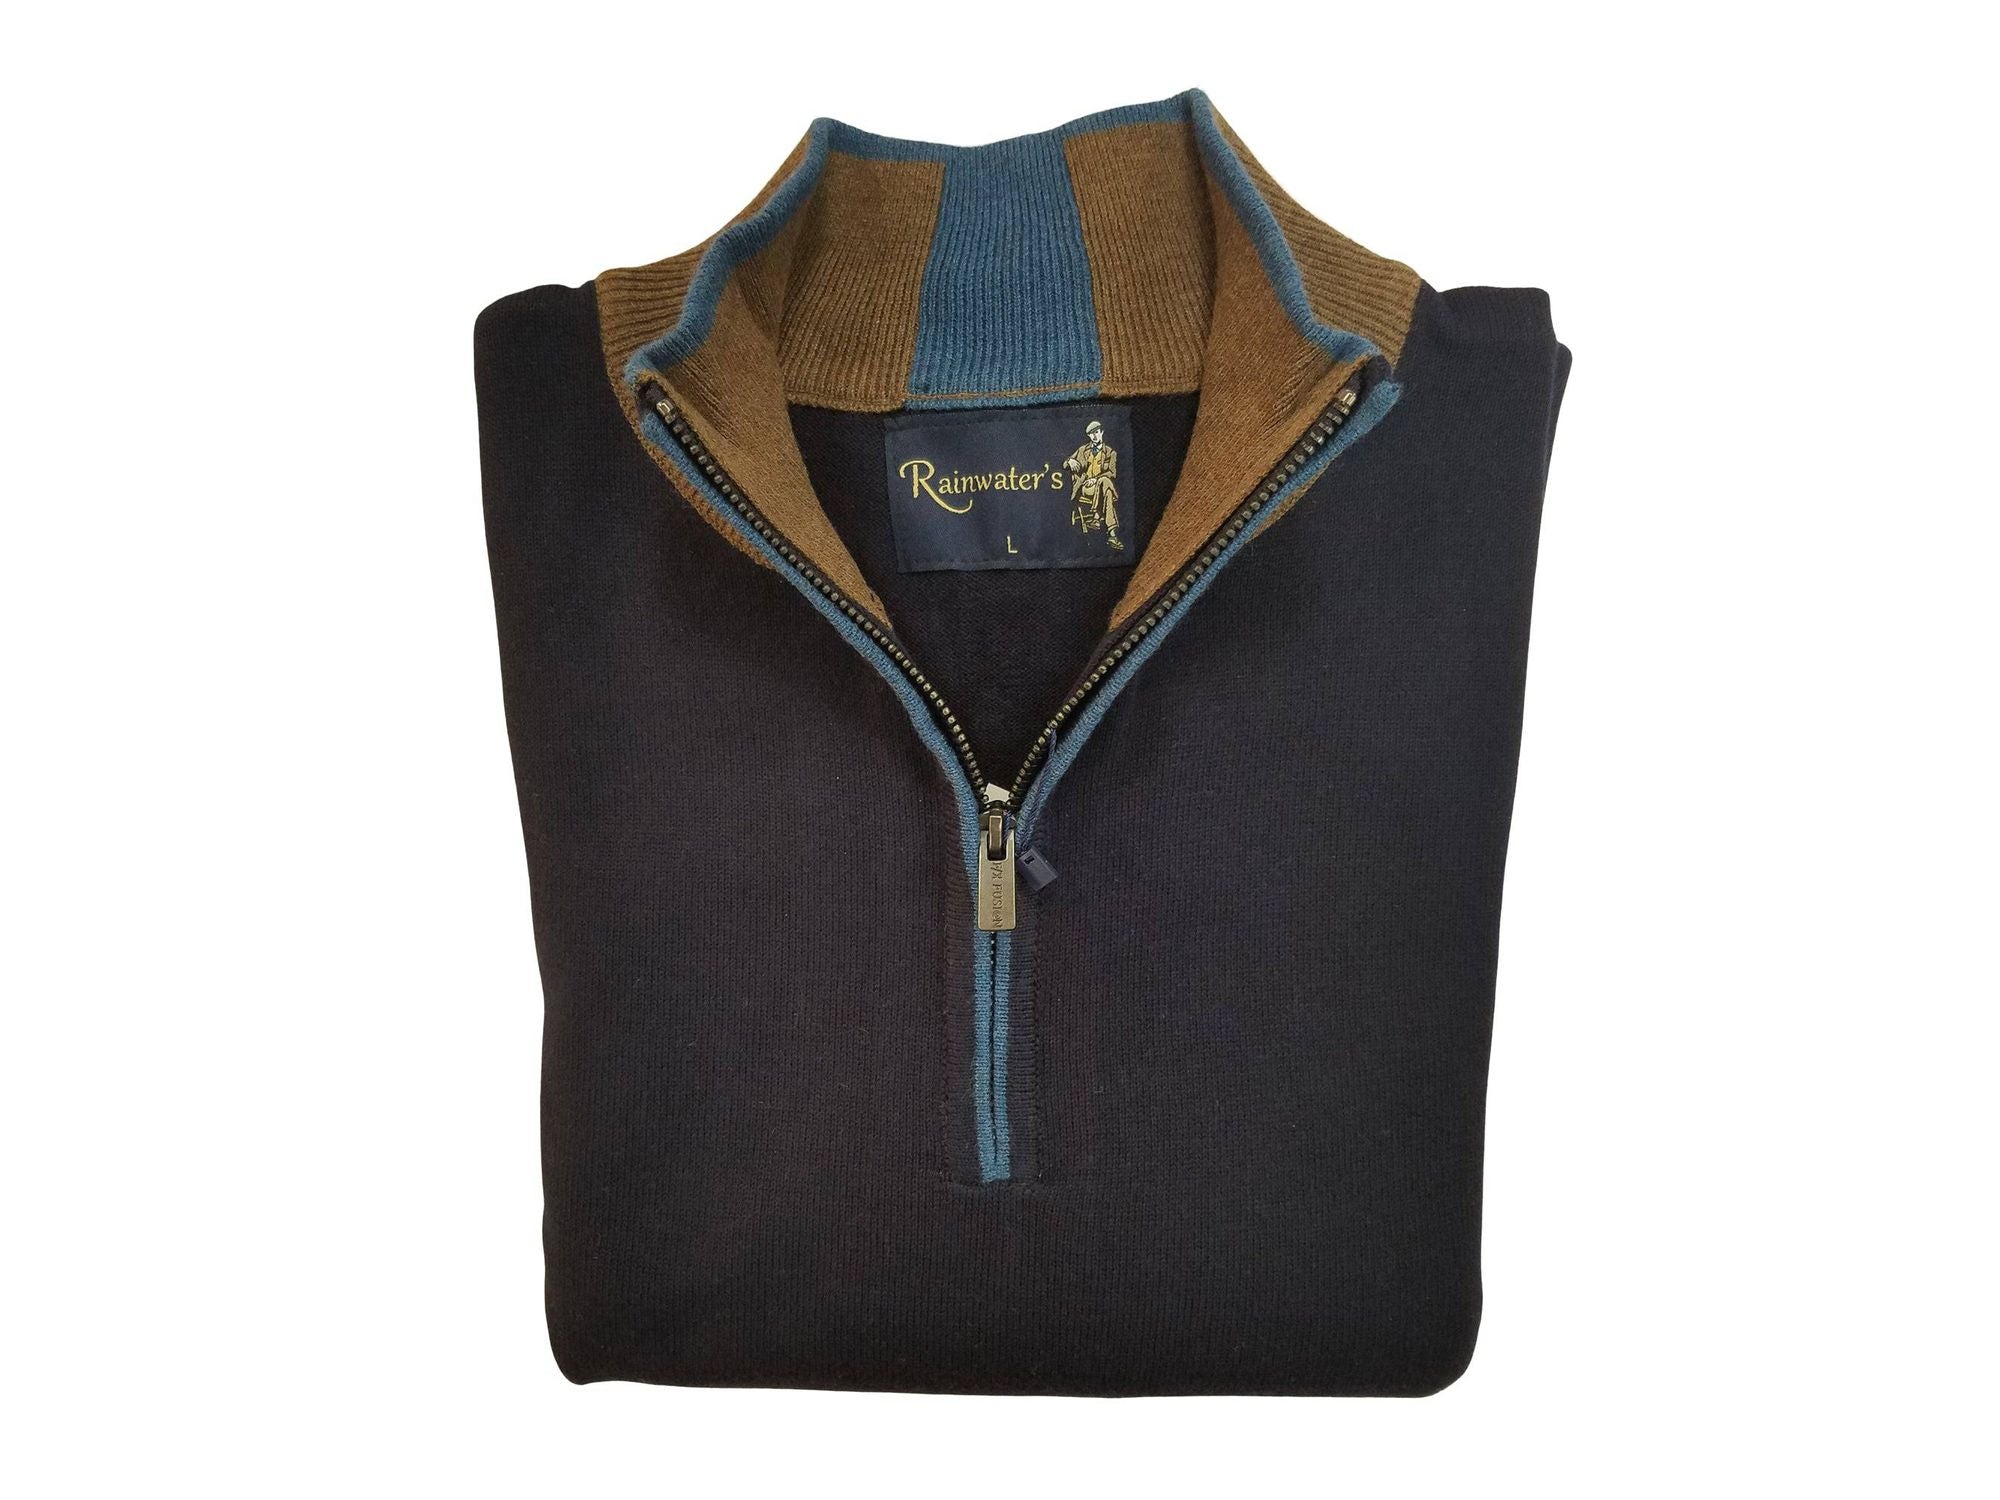 1/4 Zip Mock Sweater in Navy Solid With Brown Cotton Blend - Rainwater's Men's Clothing and Tuxedo Rental